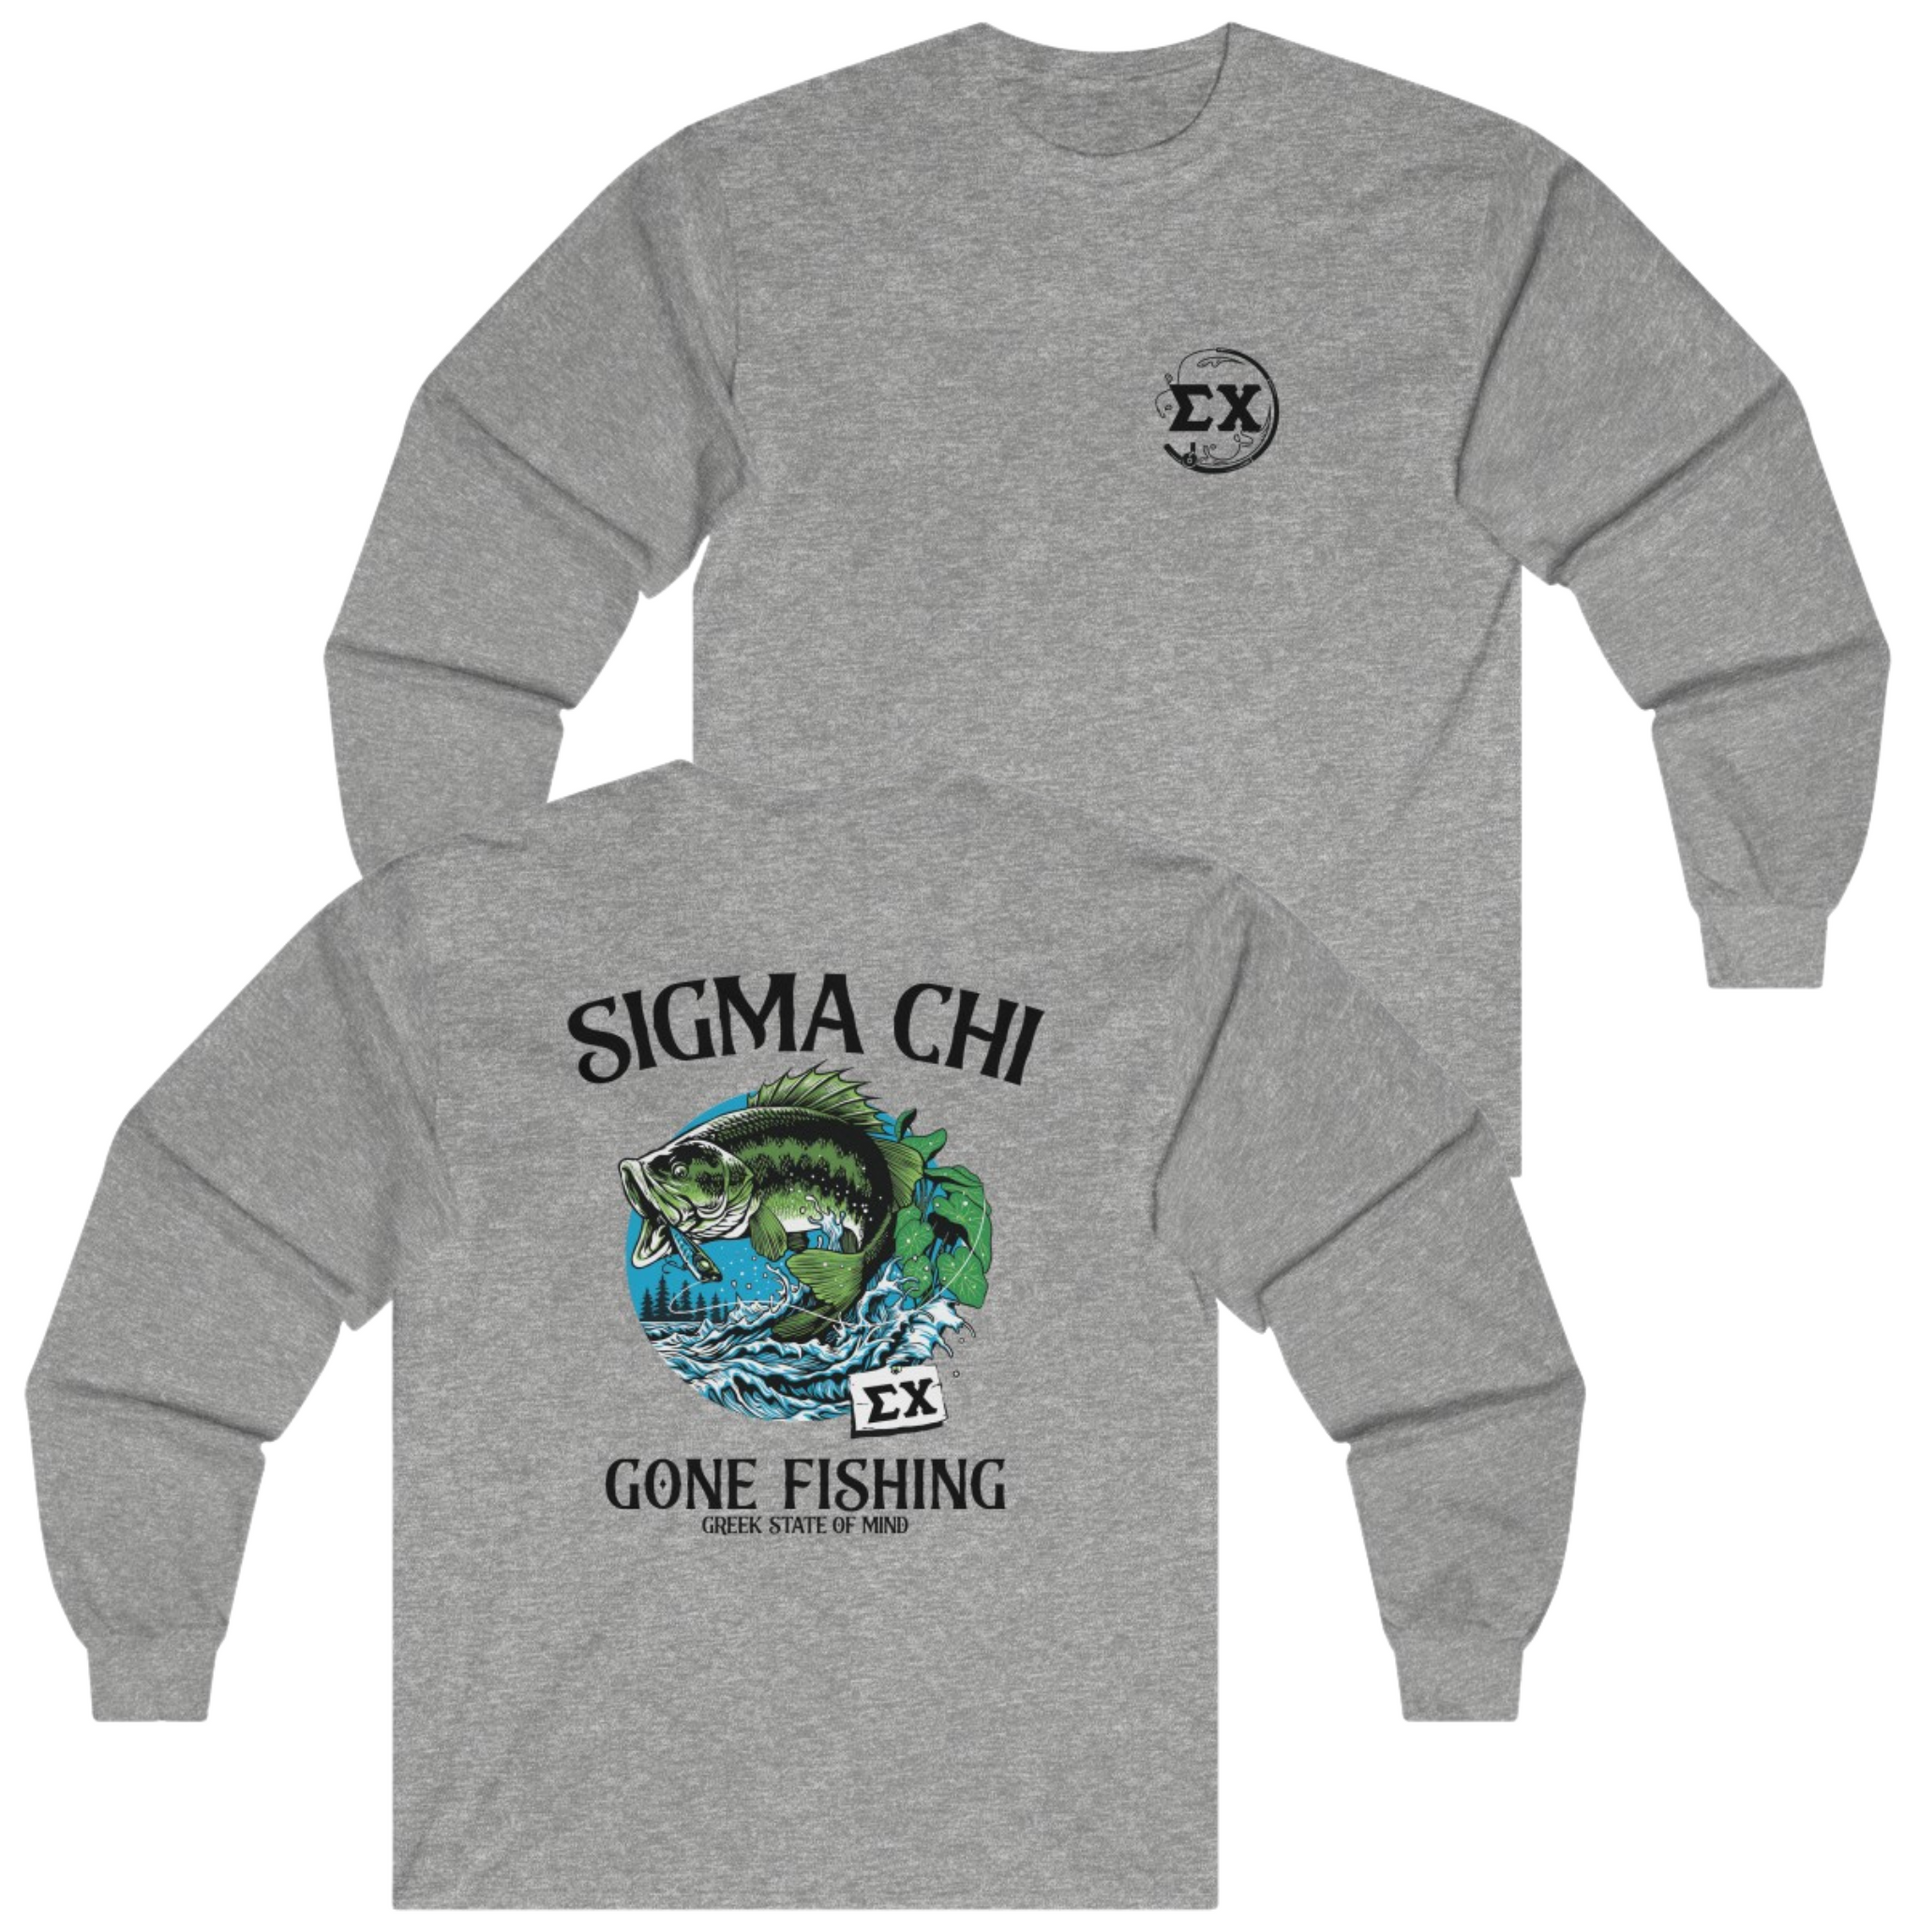 Grey Sigma Chi Graphic Long Sleeve T-Shirt | Gone Fishing | Sigma Chi Fraternity Apparel